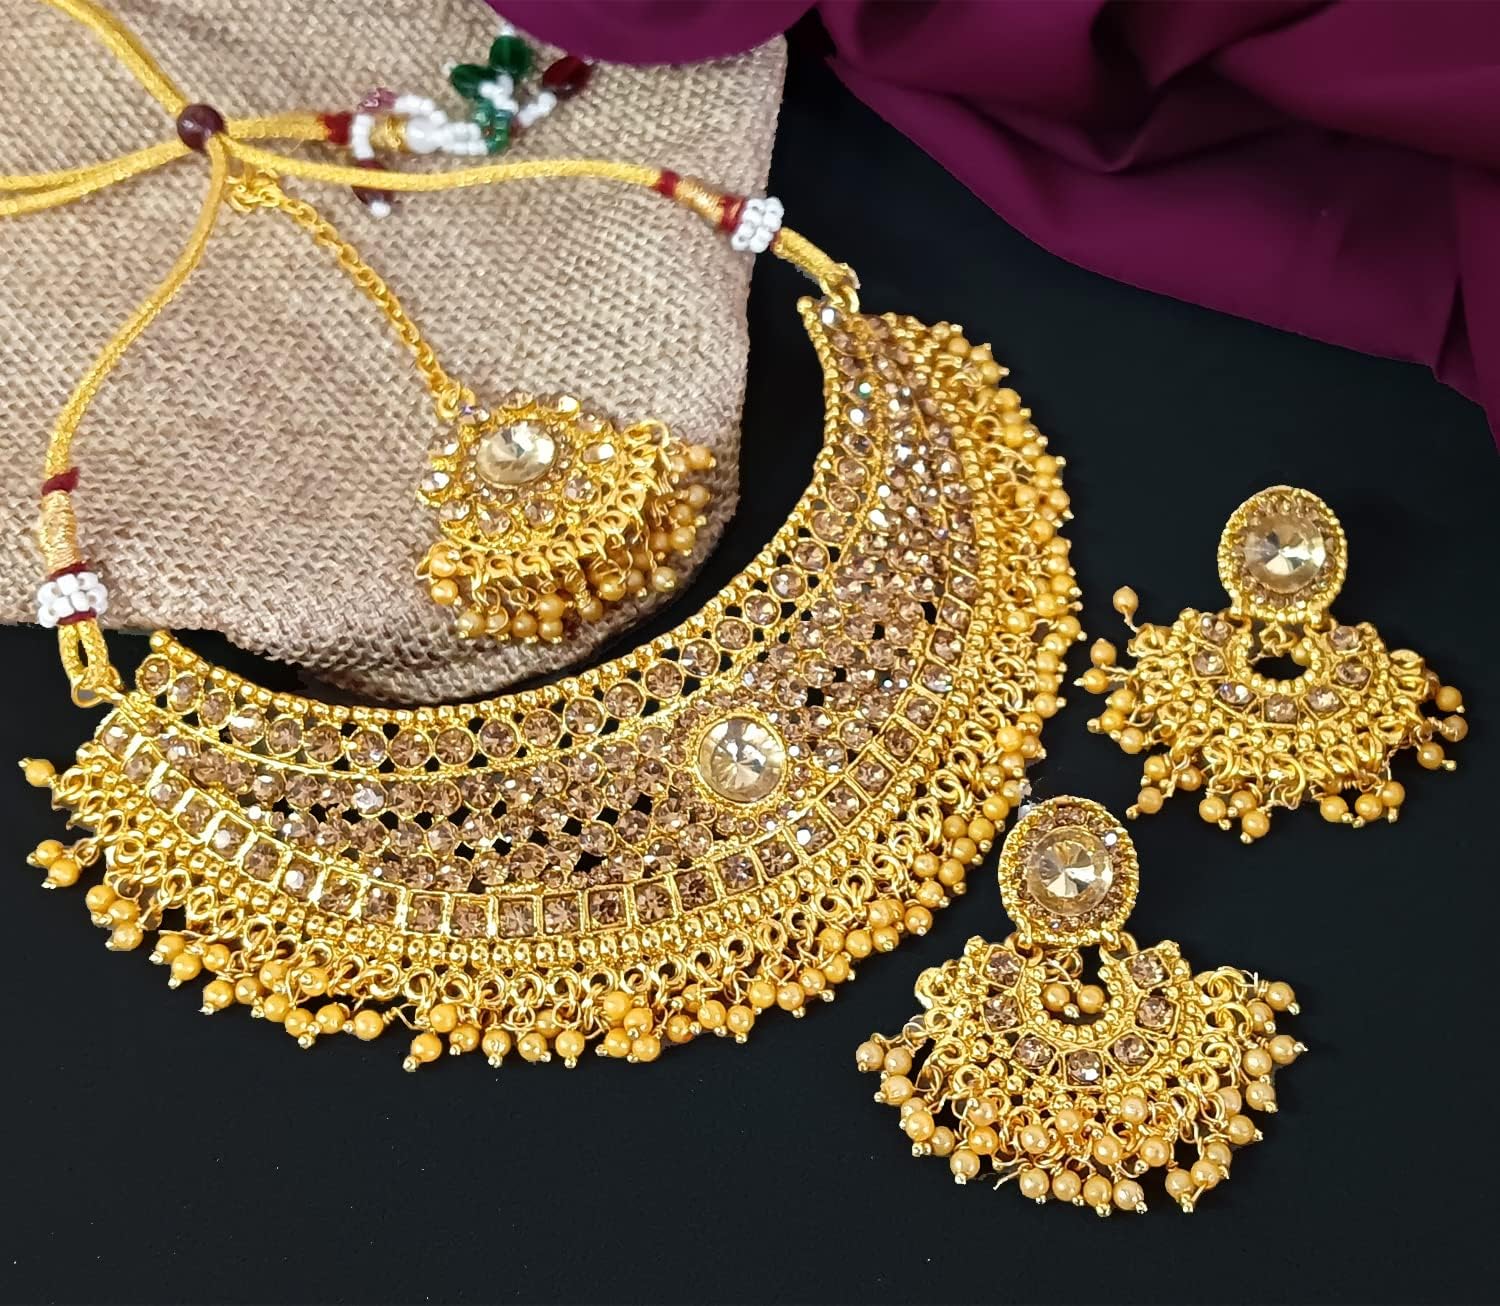 Efulgenz Indian Bollywood Traditional Crystal Pearl Wedding Choker Necklace Earrings Maang Tikka Jewelry Set (Style1 Gold) Valentines Gift